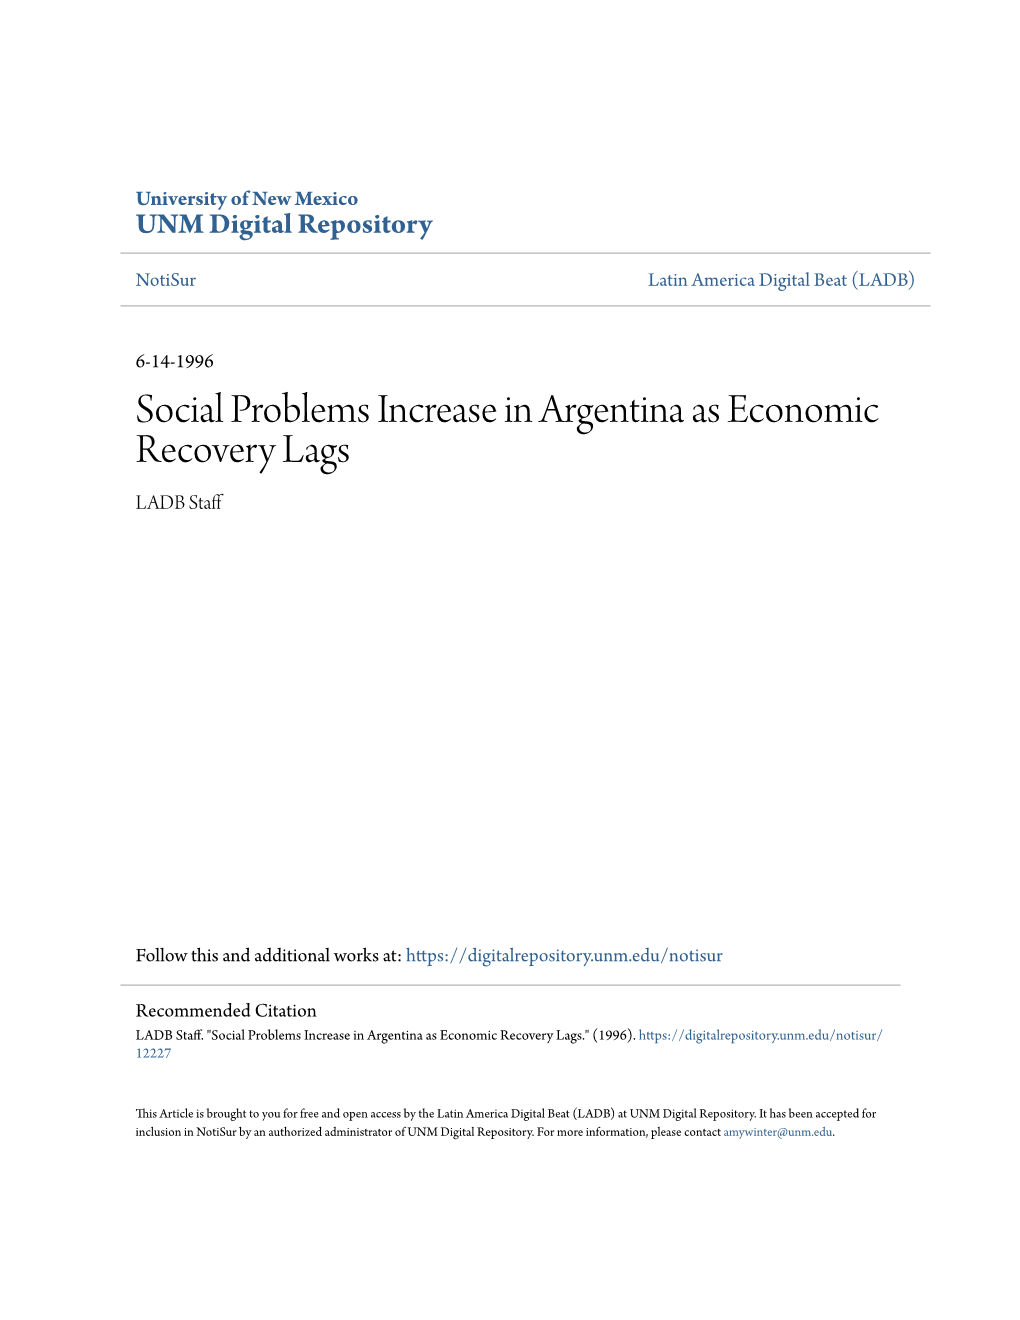 Social Problems Increase in Argentina As Economic Recovery Lags LADB Staff